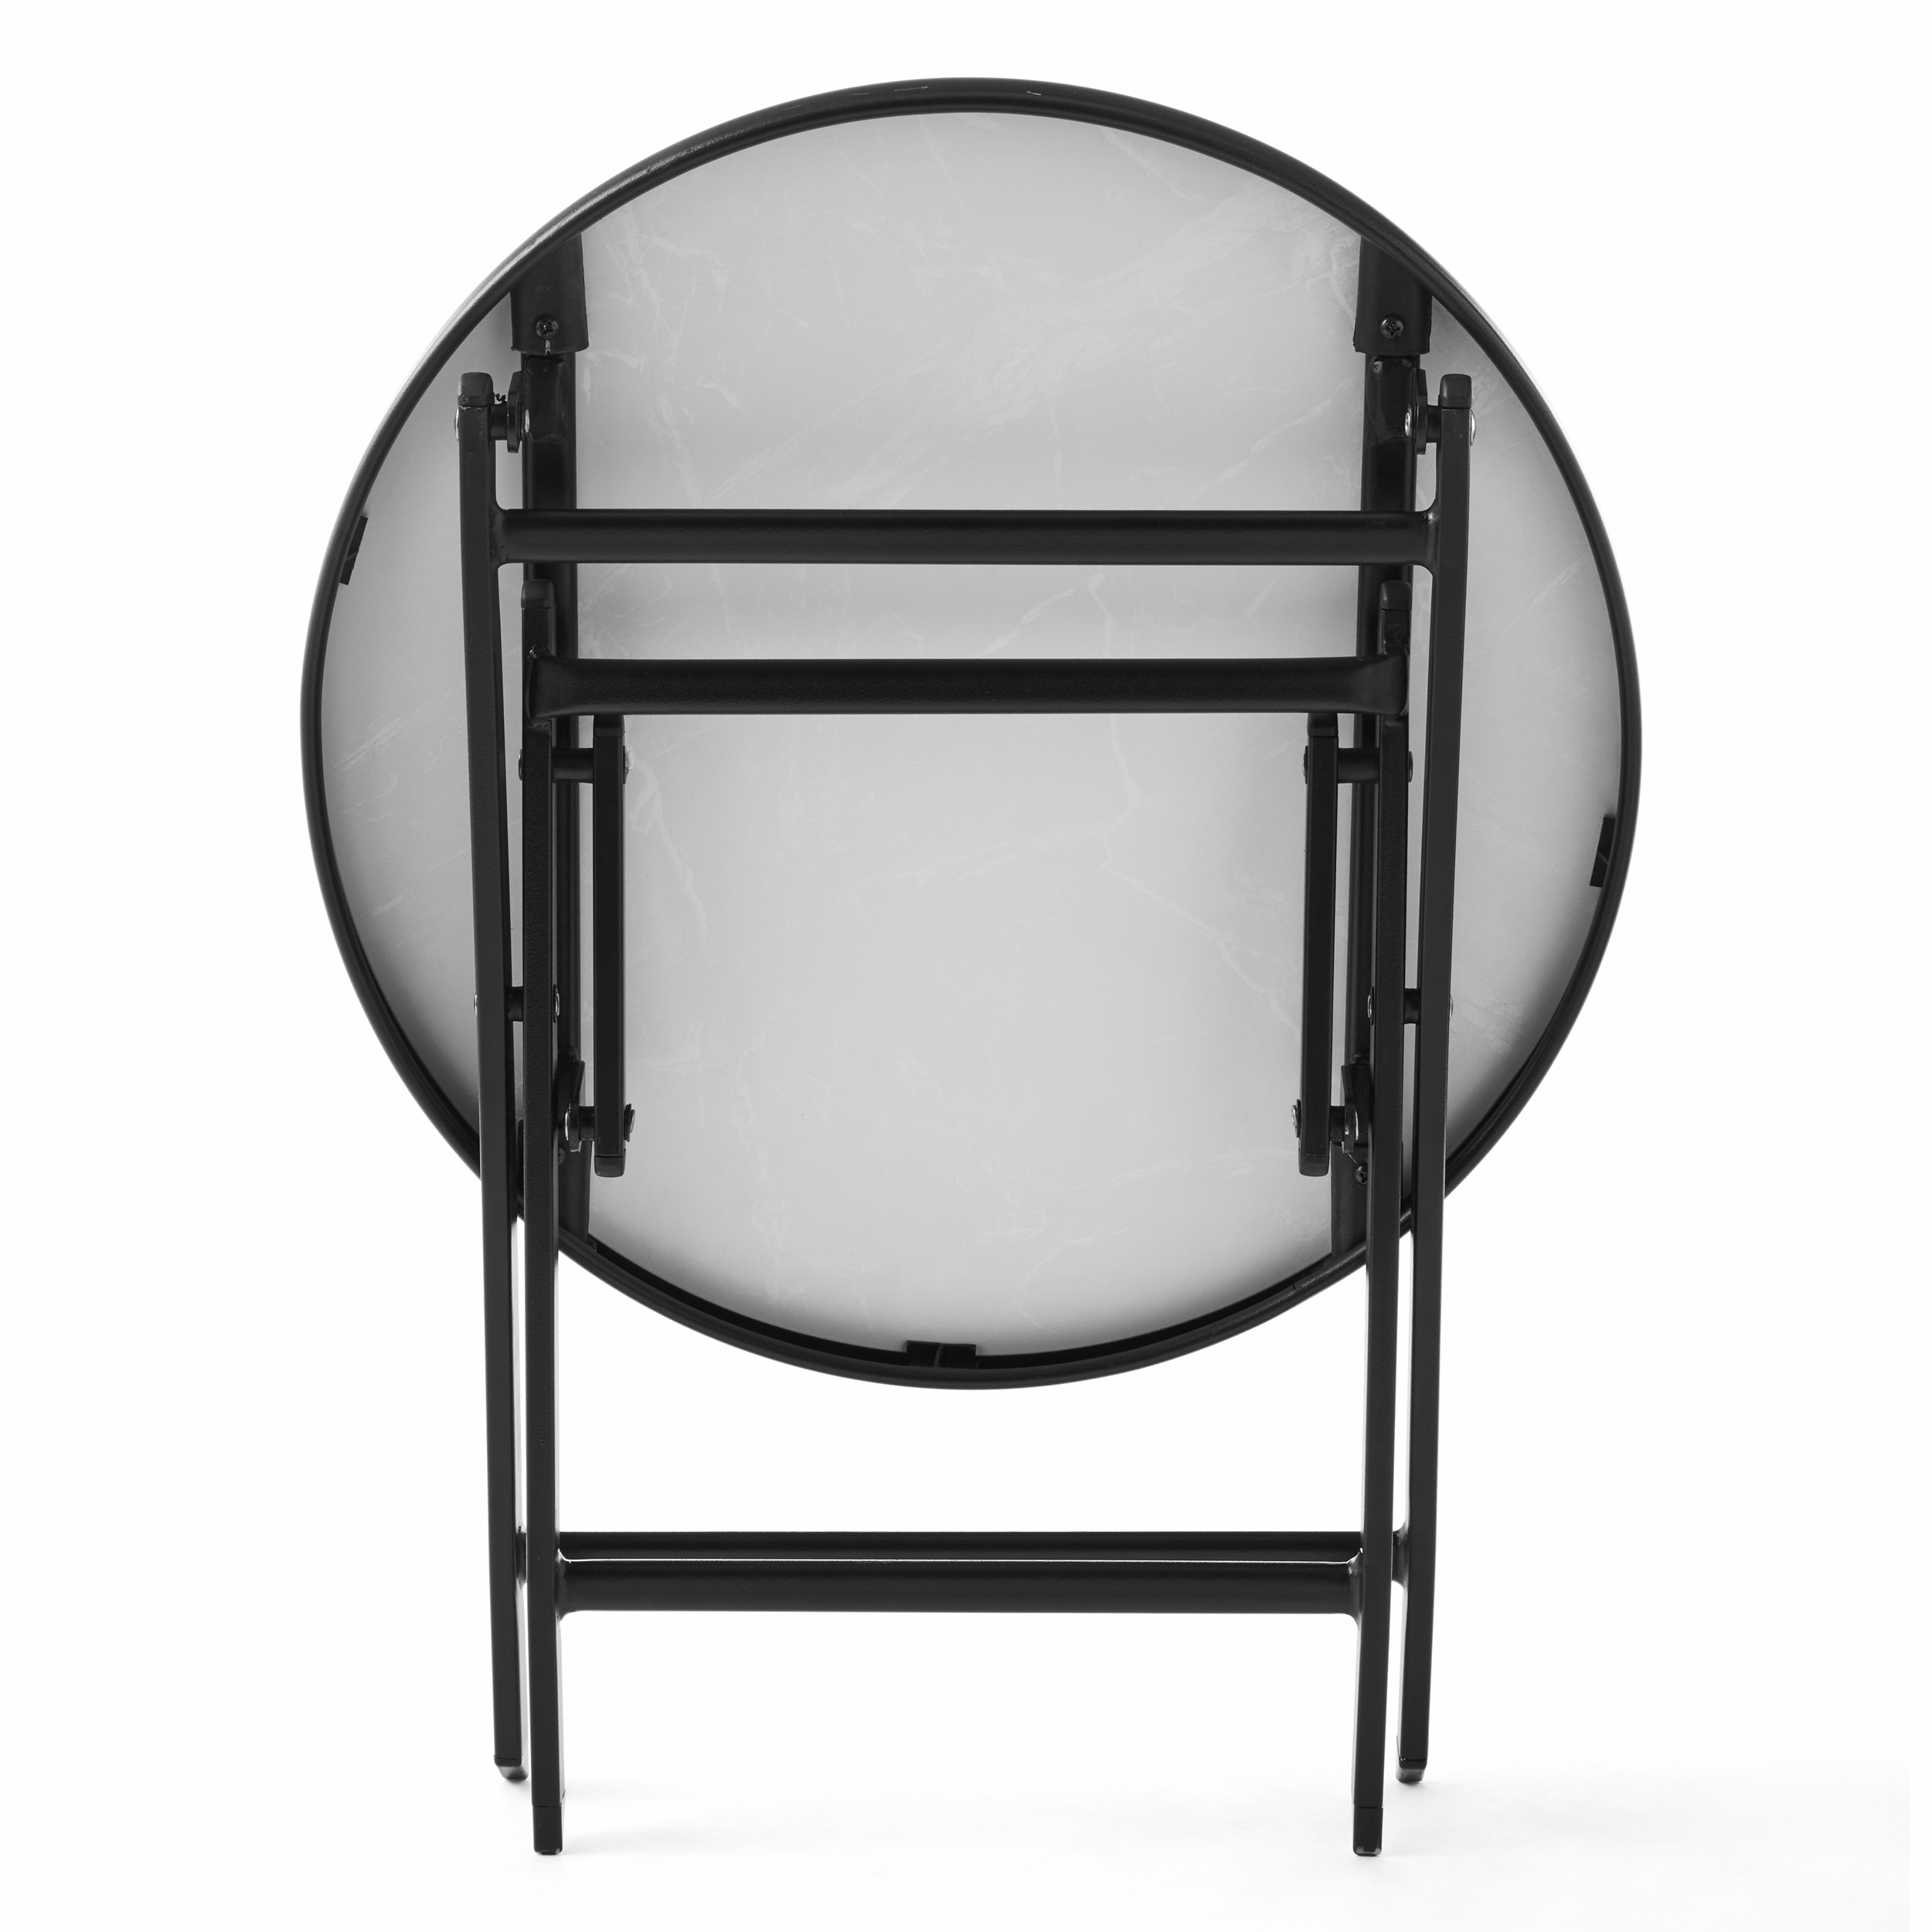 Mainstays 18" Greyson Square Black Marble Steel Round Folding Table - image 5 of 6